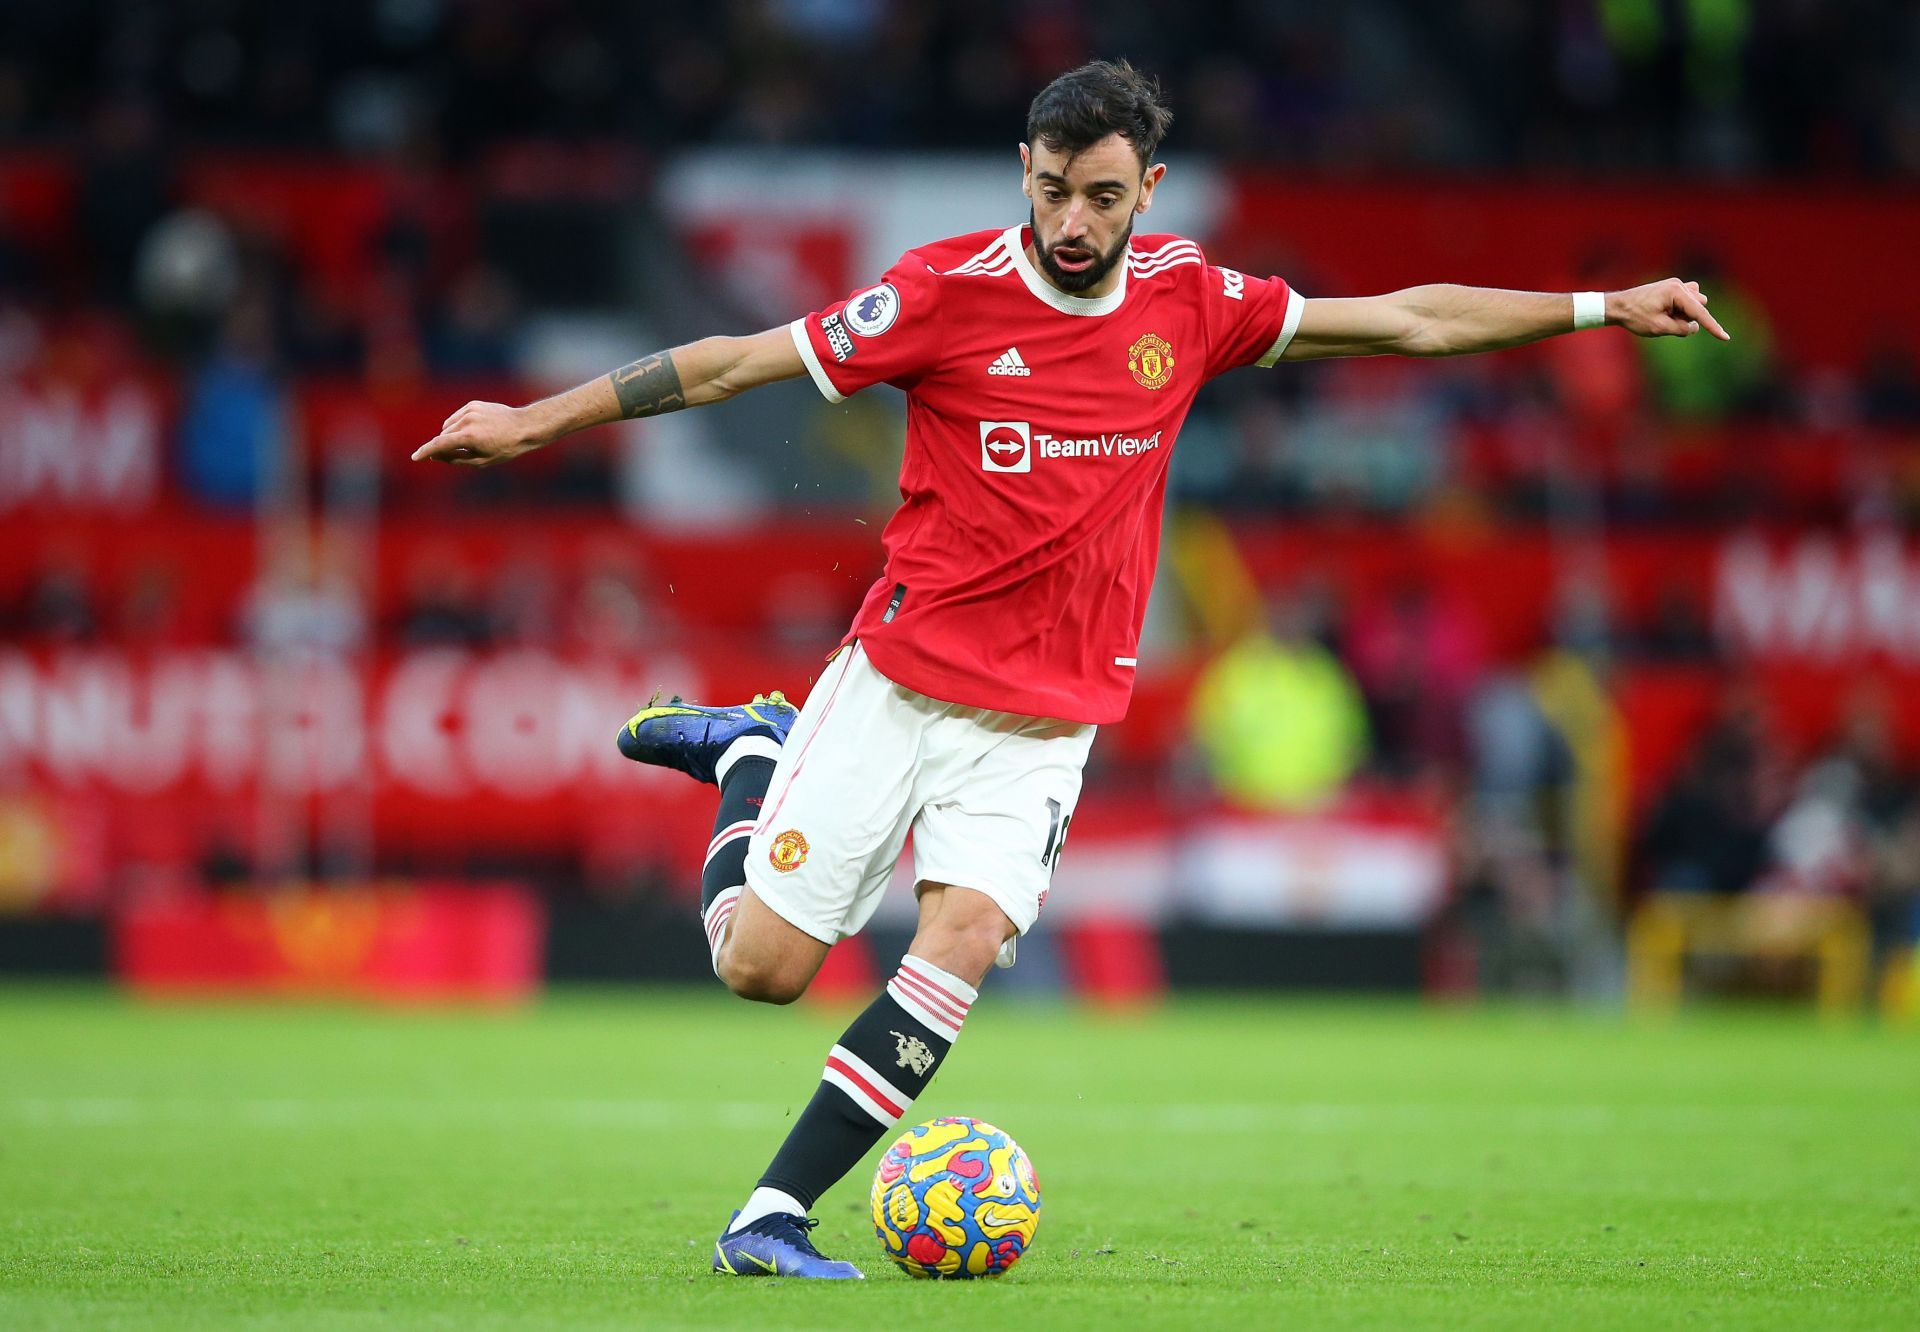 Manchester United talisman Bruno Fernandes has been an incredible addition to the Premier League.